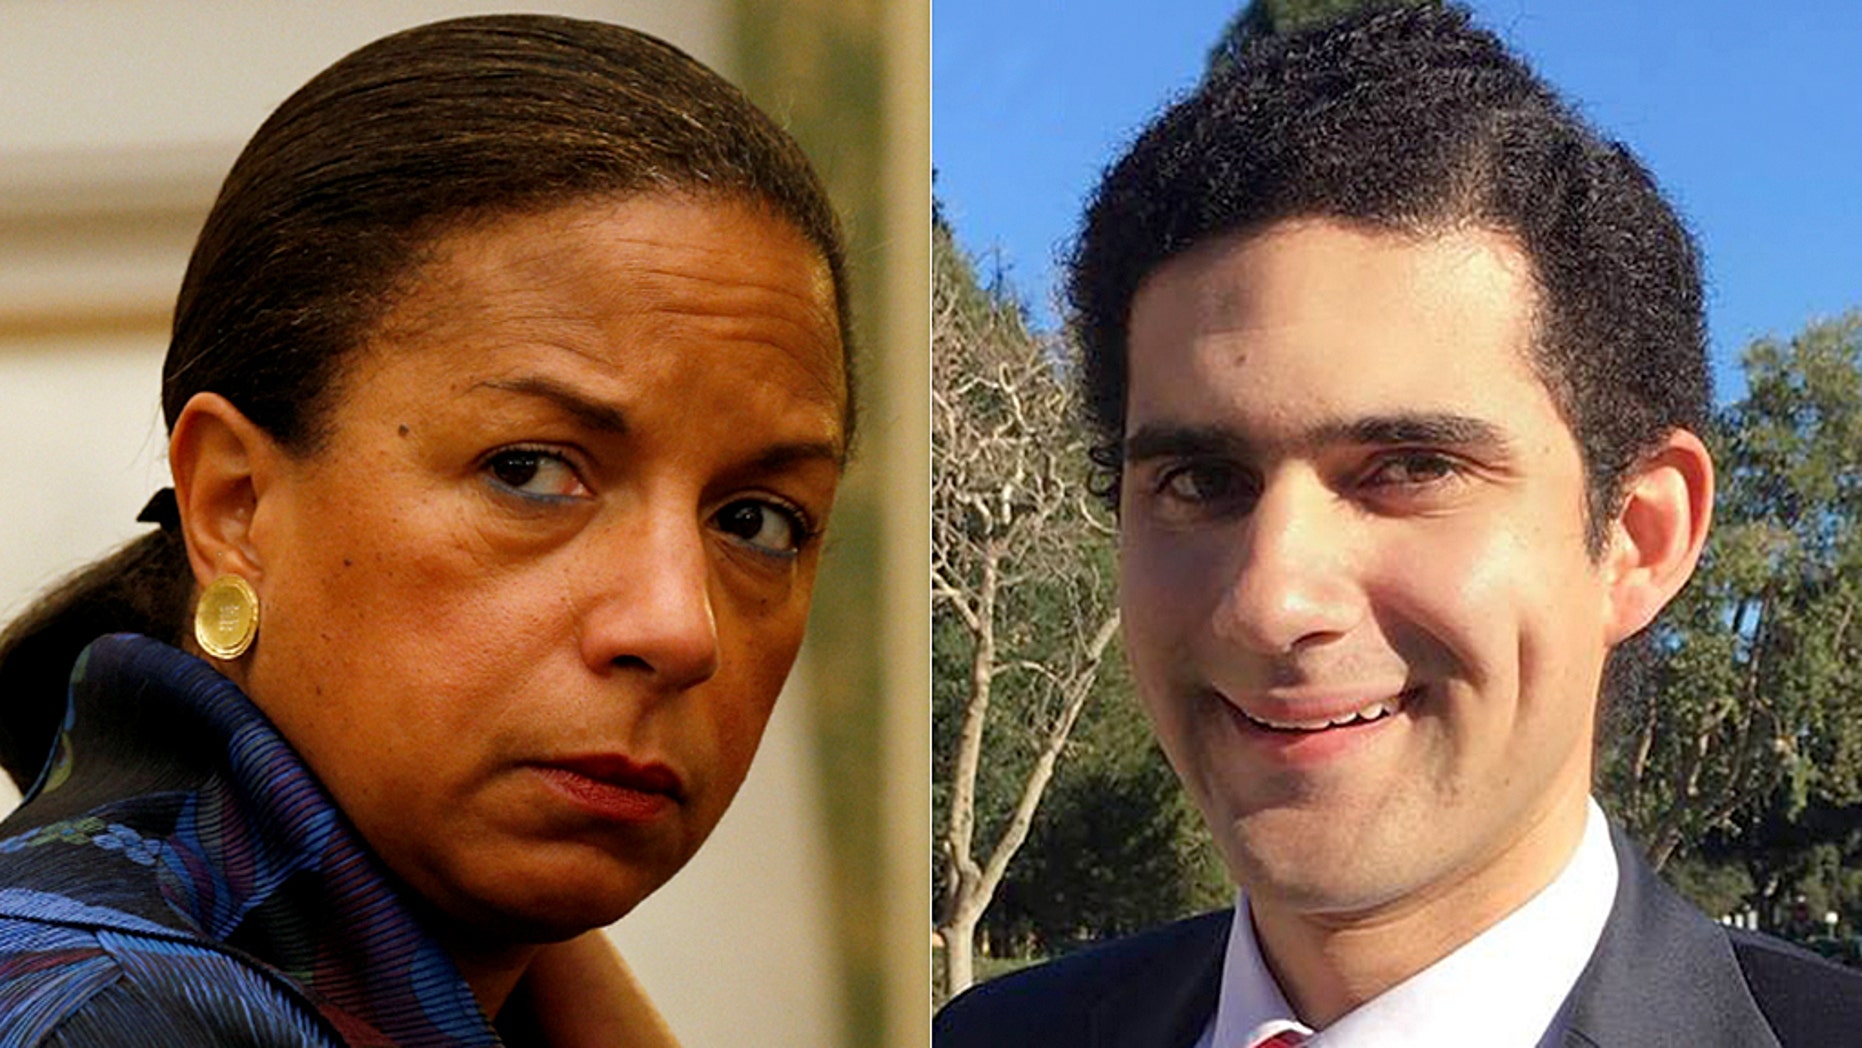 Susan Rice’s Republican son allegedly bodily assaulted at pro-Kavanaugh rally ...